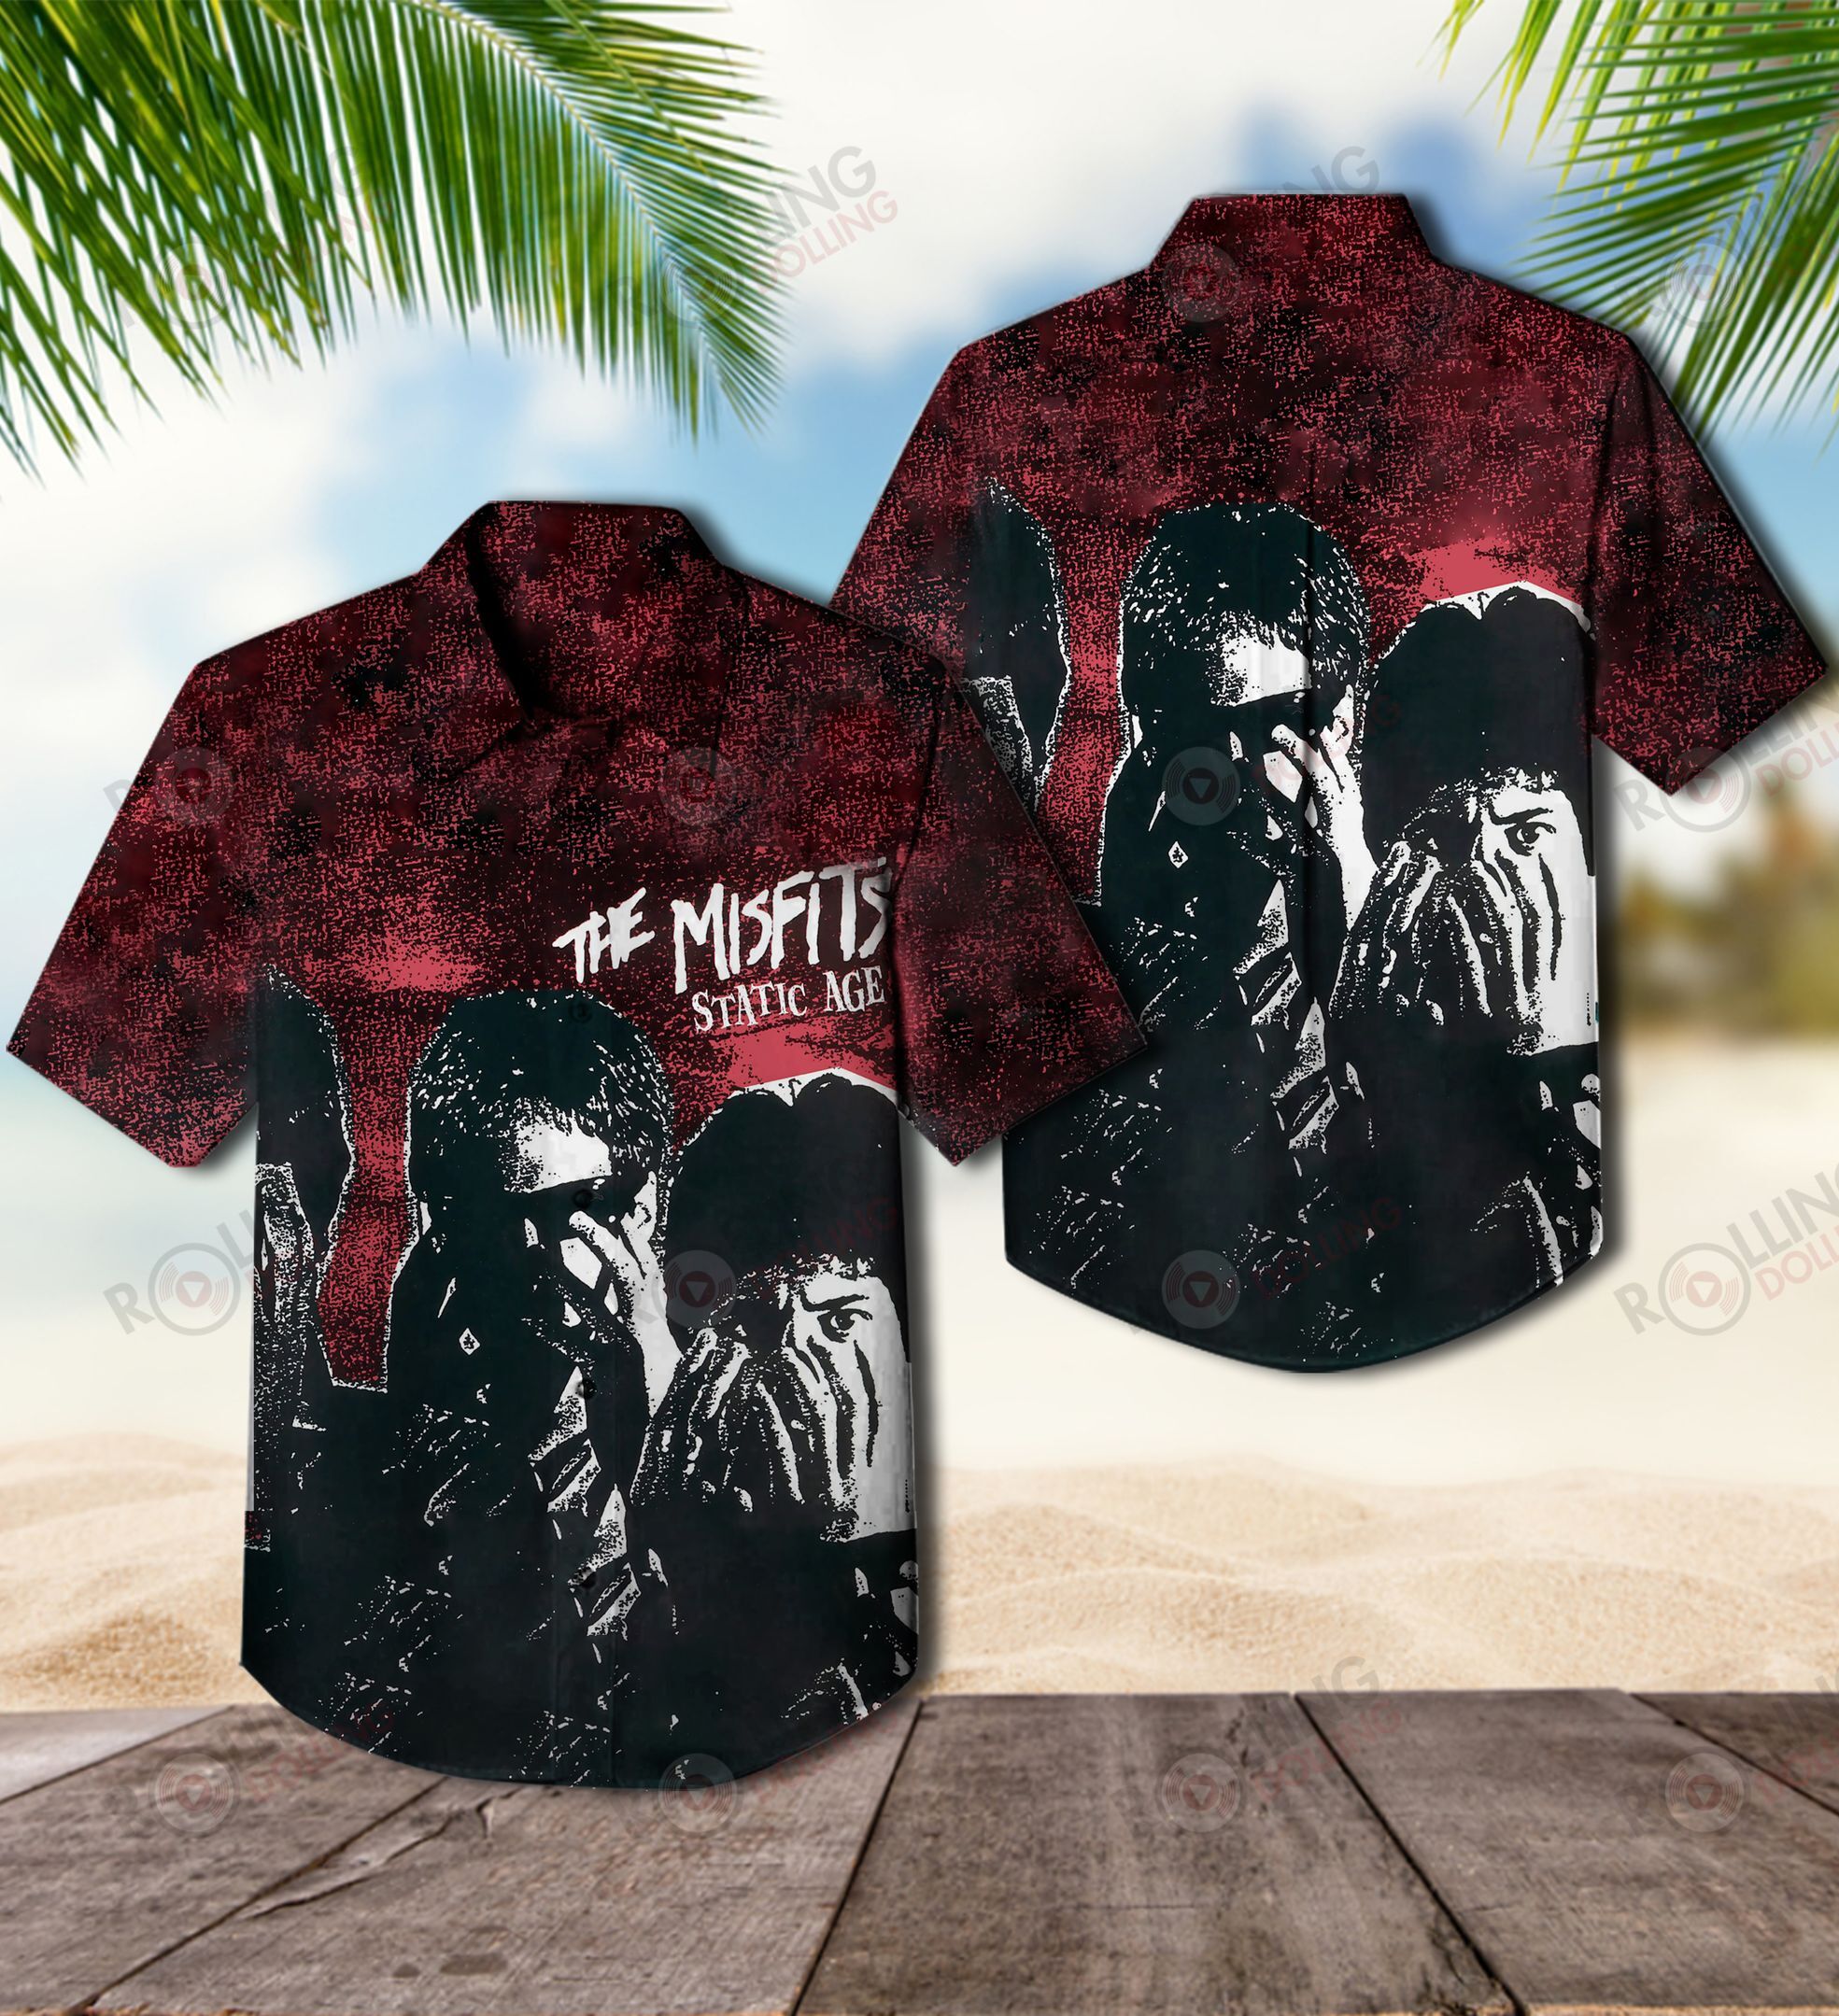 For summer, consider wearing This Amazing Hawaiian Shirt shirt in our store 142